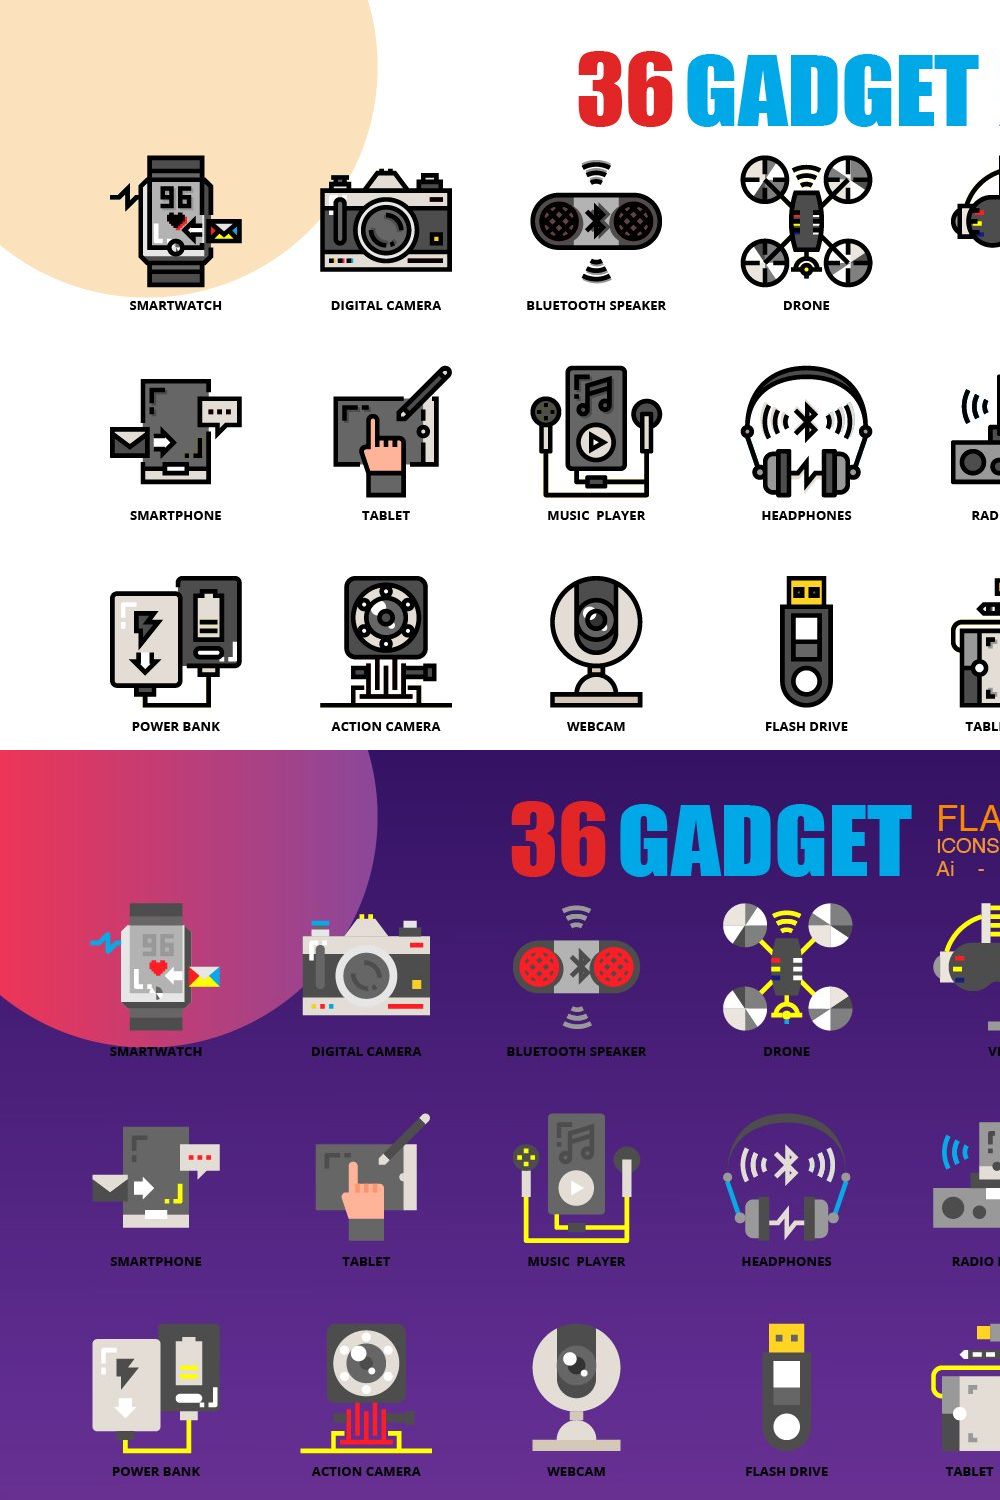 36 Gadget icons set x 3 Style pinterest preview image.